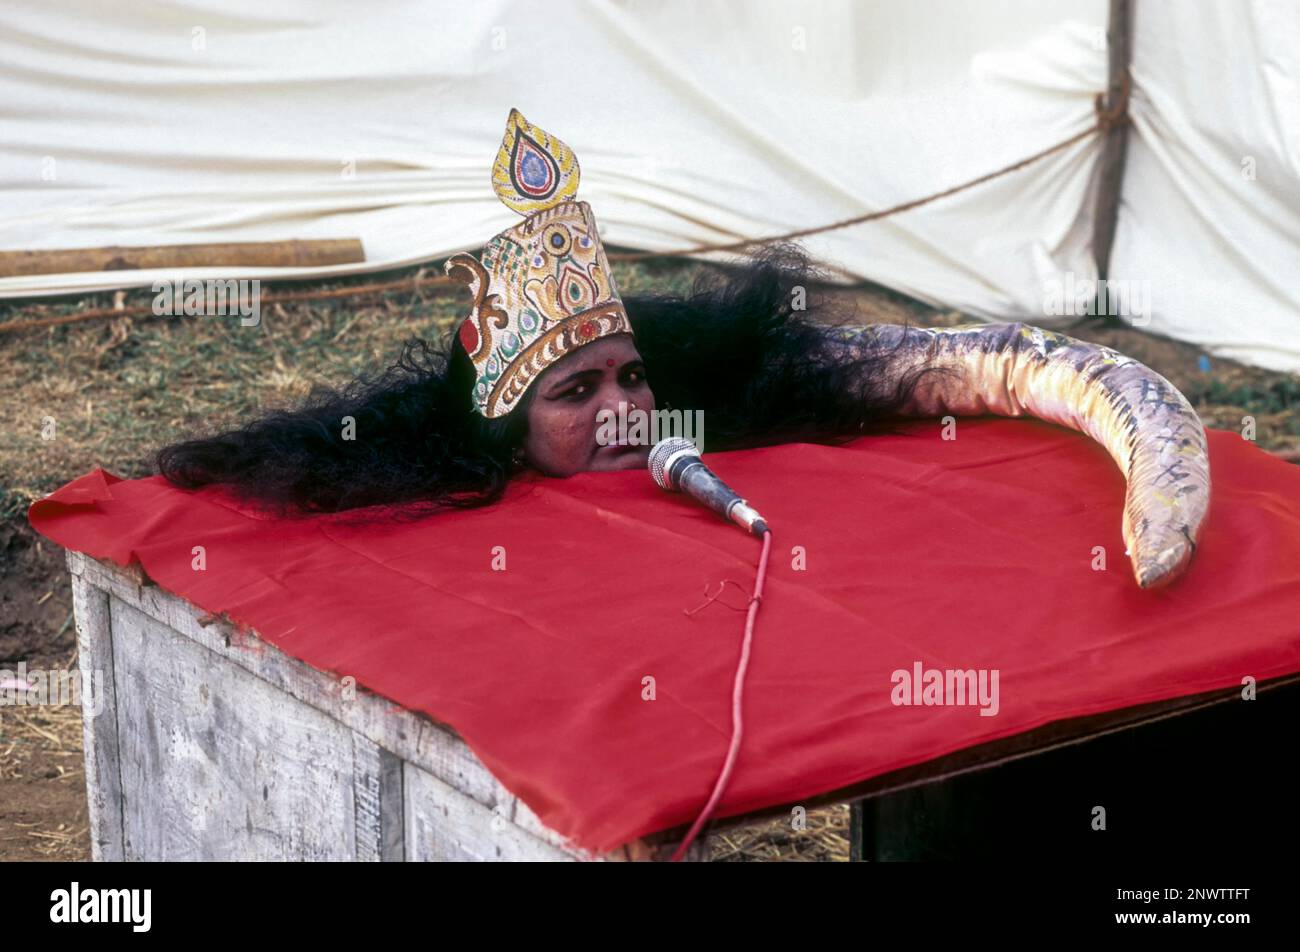 A woman performing a magic show like snake in a village exhibition, kerala, India, Asia Stock Photo